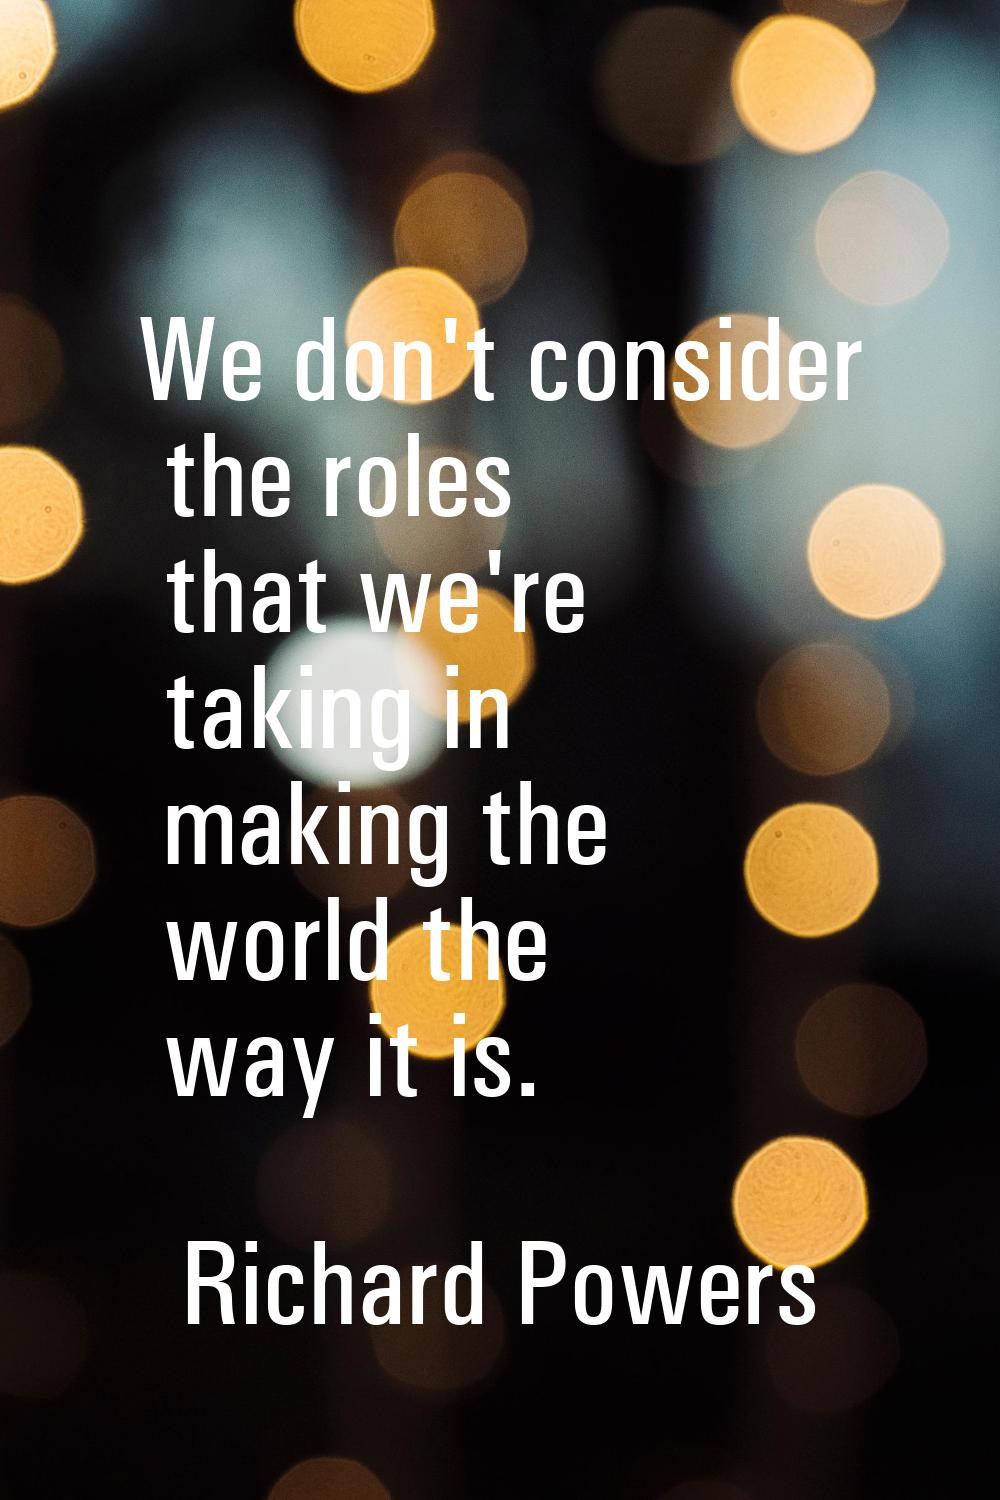 We don't consider the roles that we're taking in making the world the way it is.